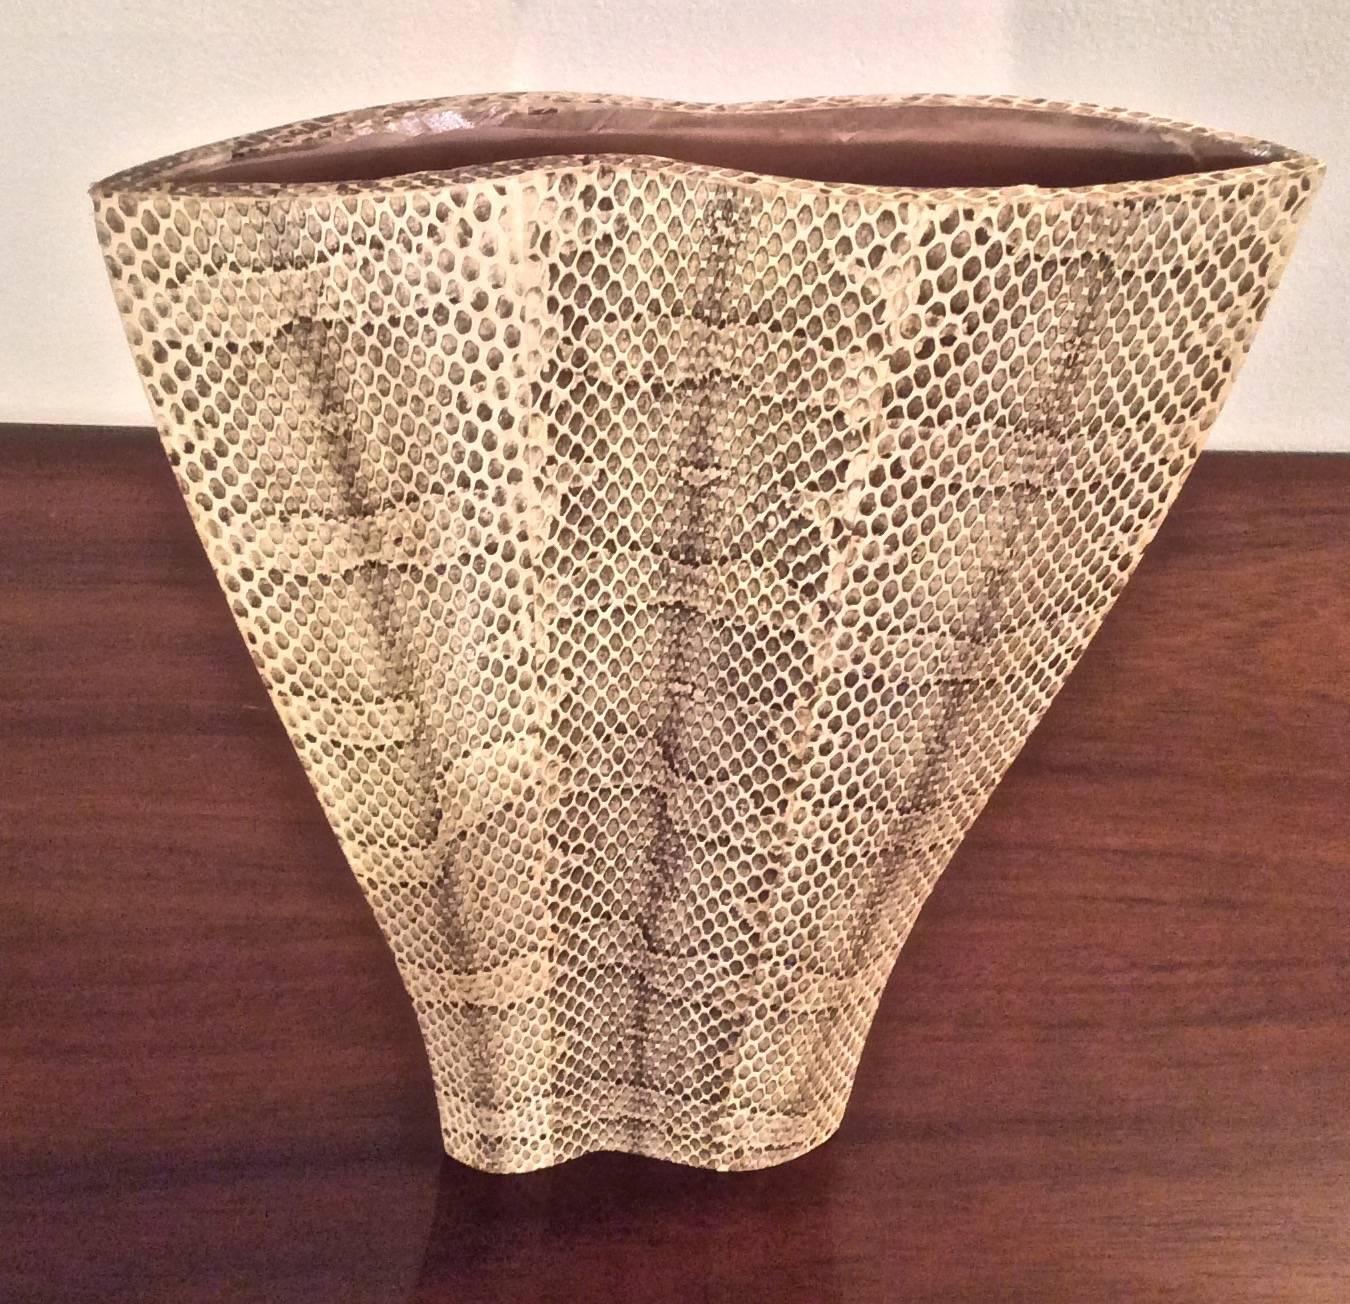 Subtle curved form for this sculptural one-of-a-kind vase sheathed in gorgeous snakeskin by famed decorative arts design firm R & Y Augousti.